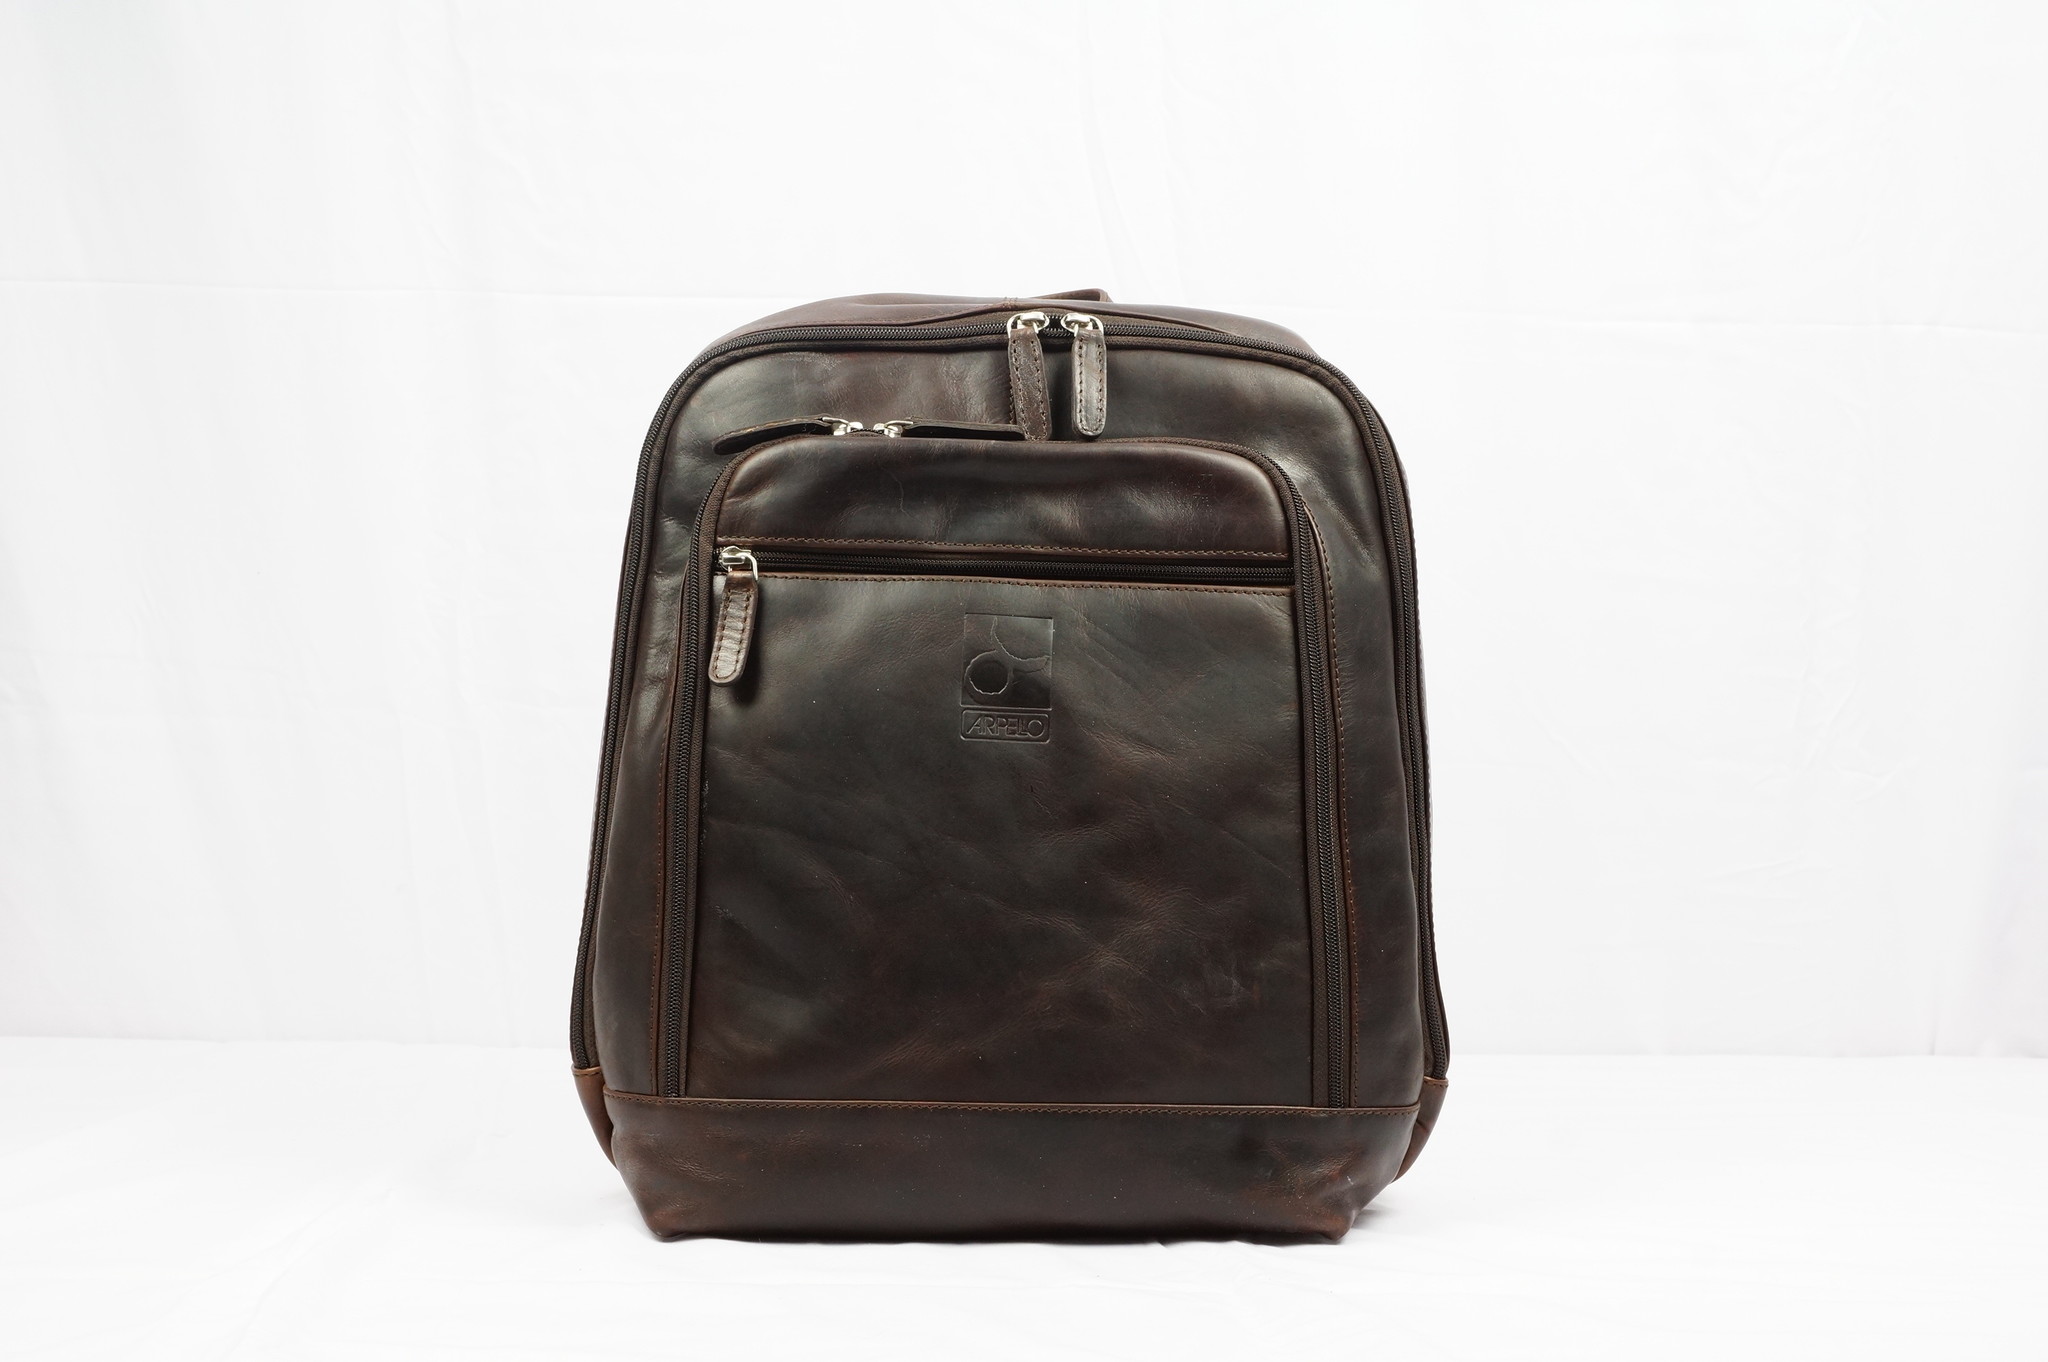 Arpello Old School back pack